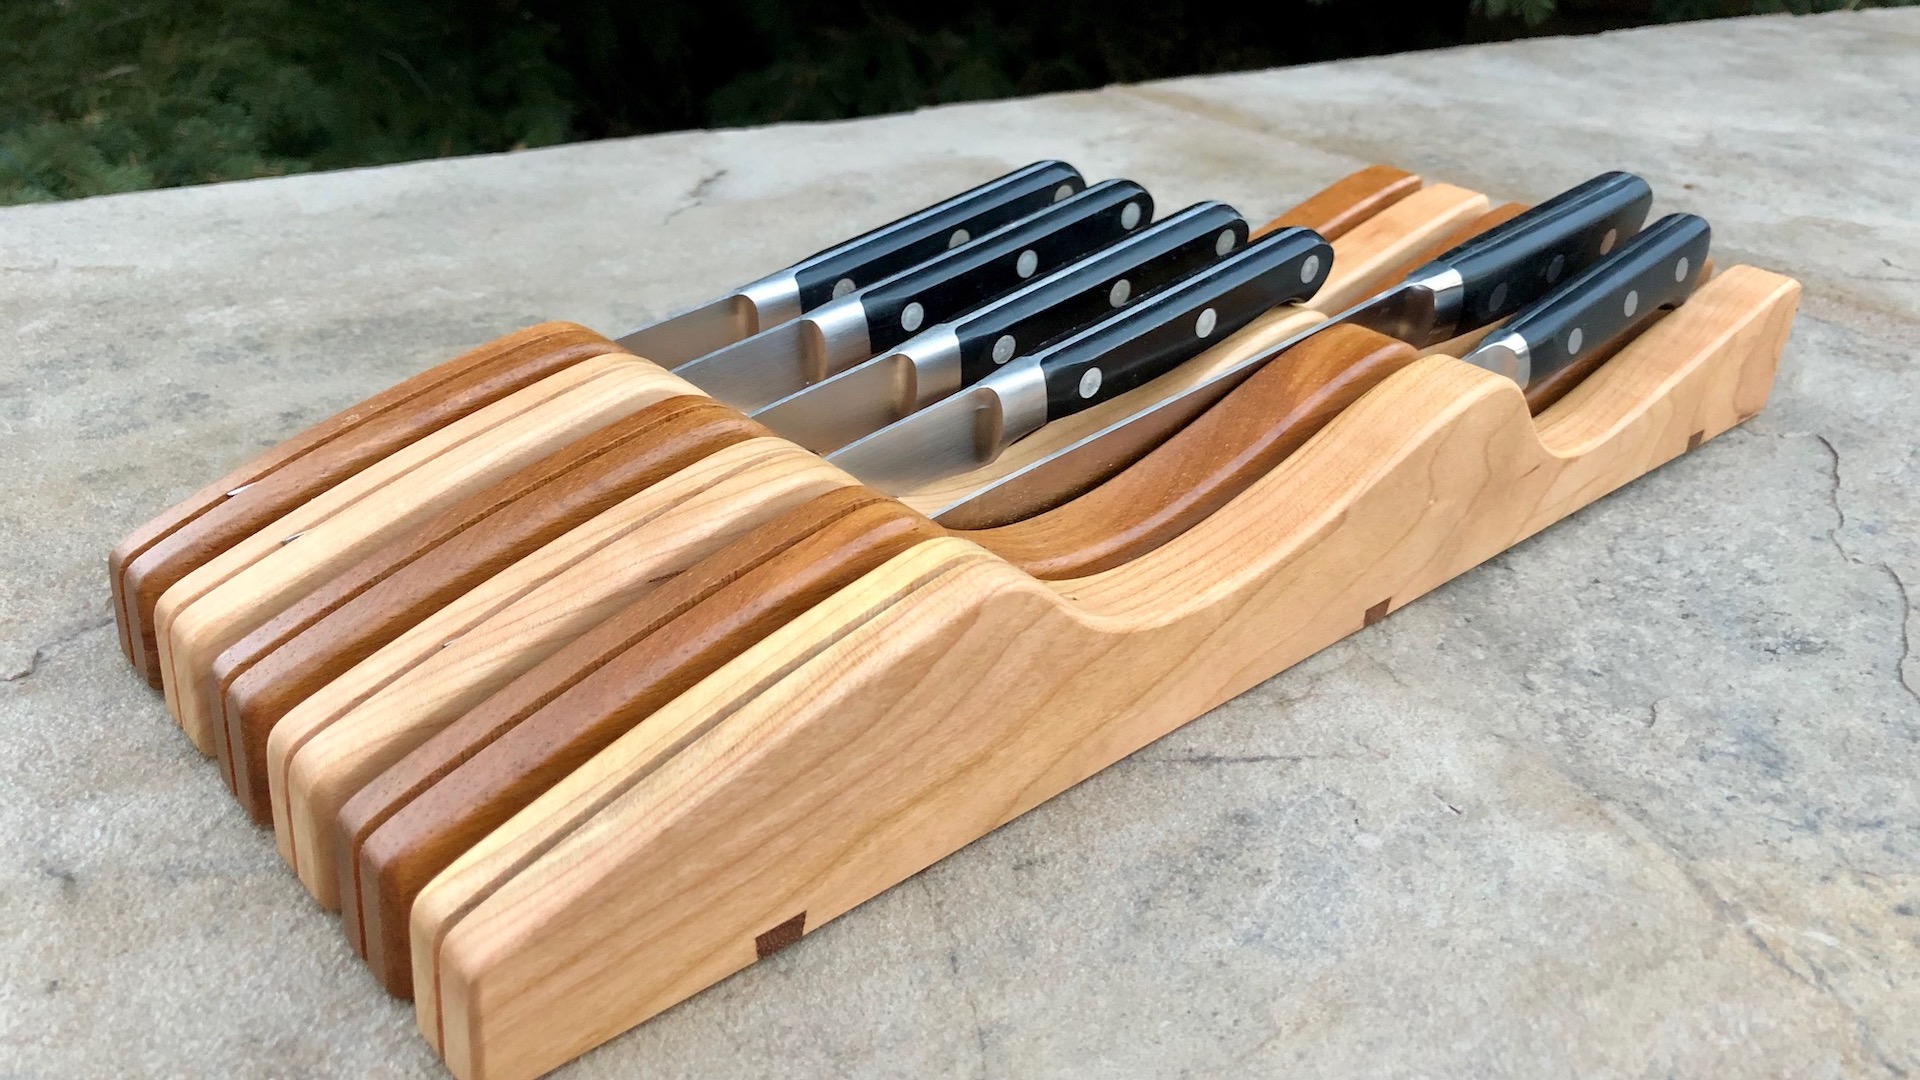 Beech wood knife holder, Wooden kitchen drawer organizer tray for ...